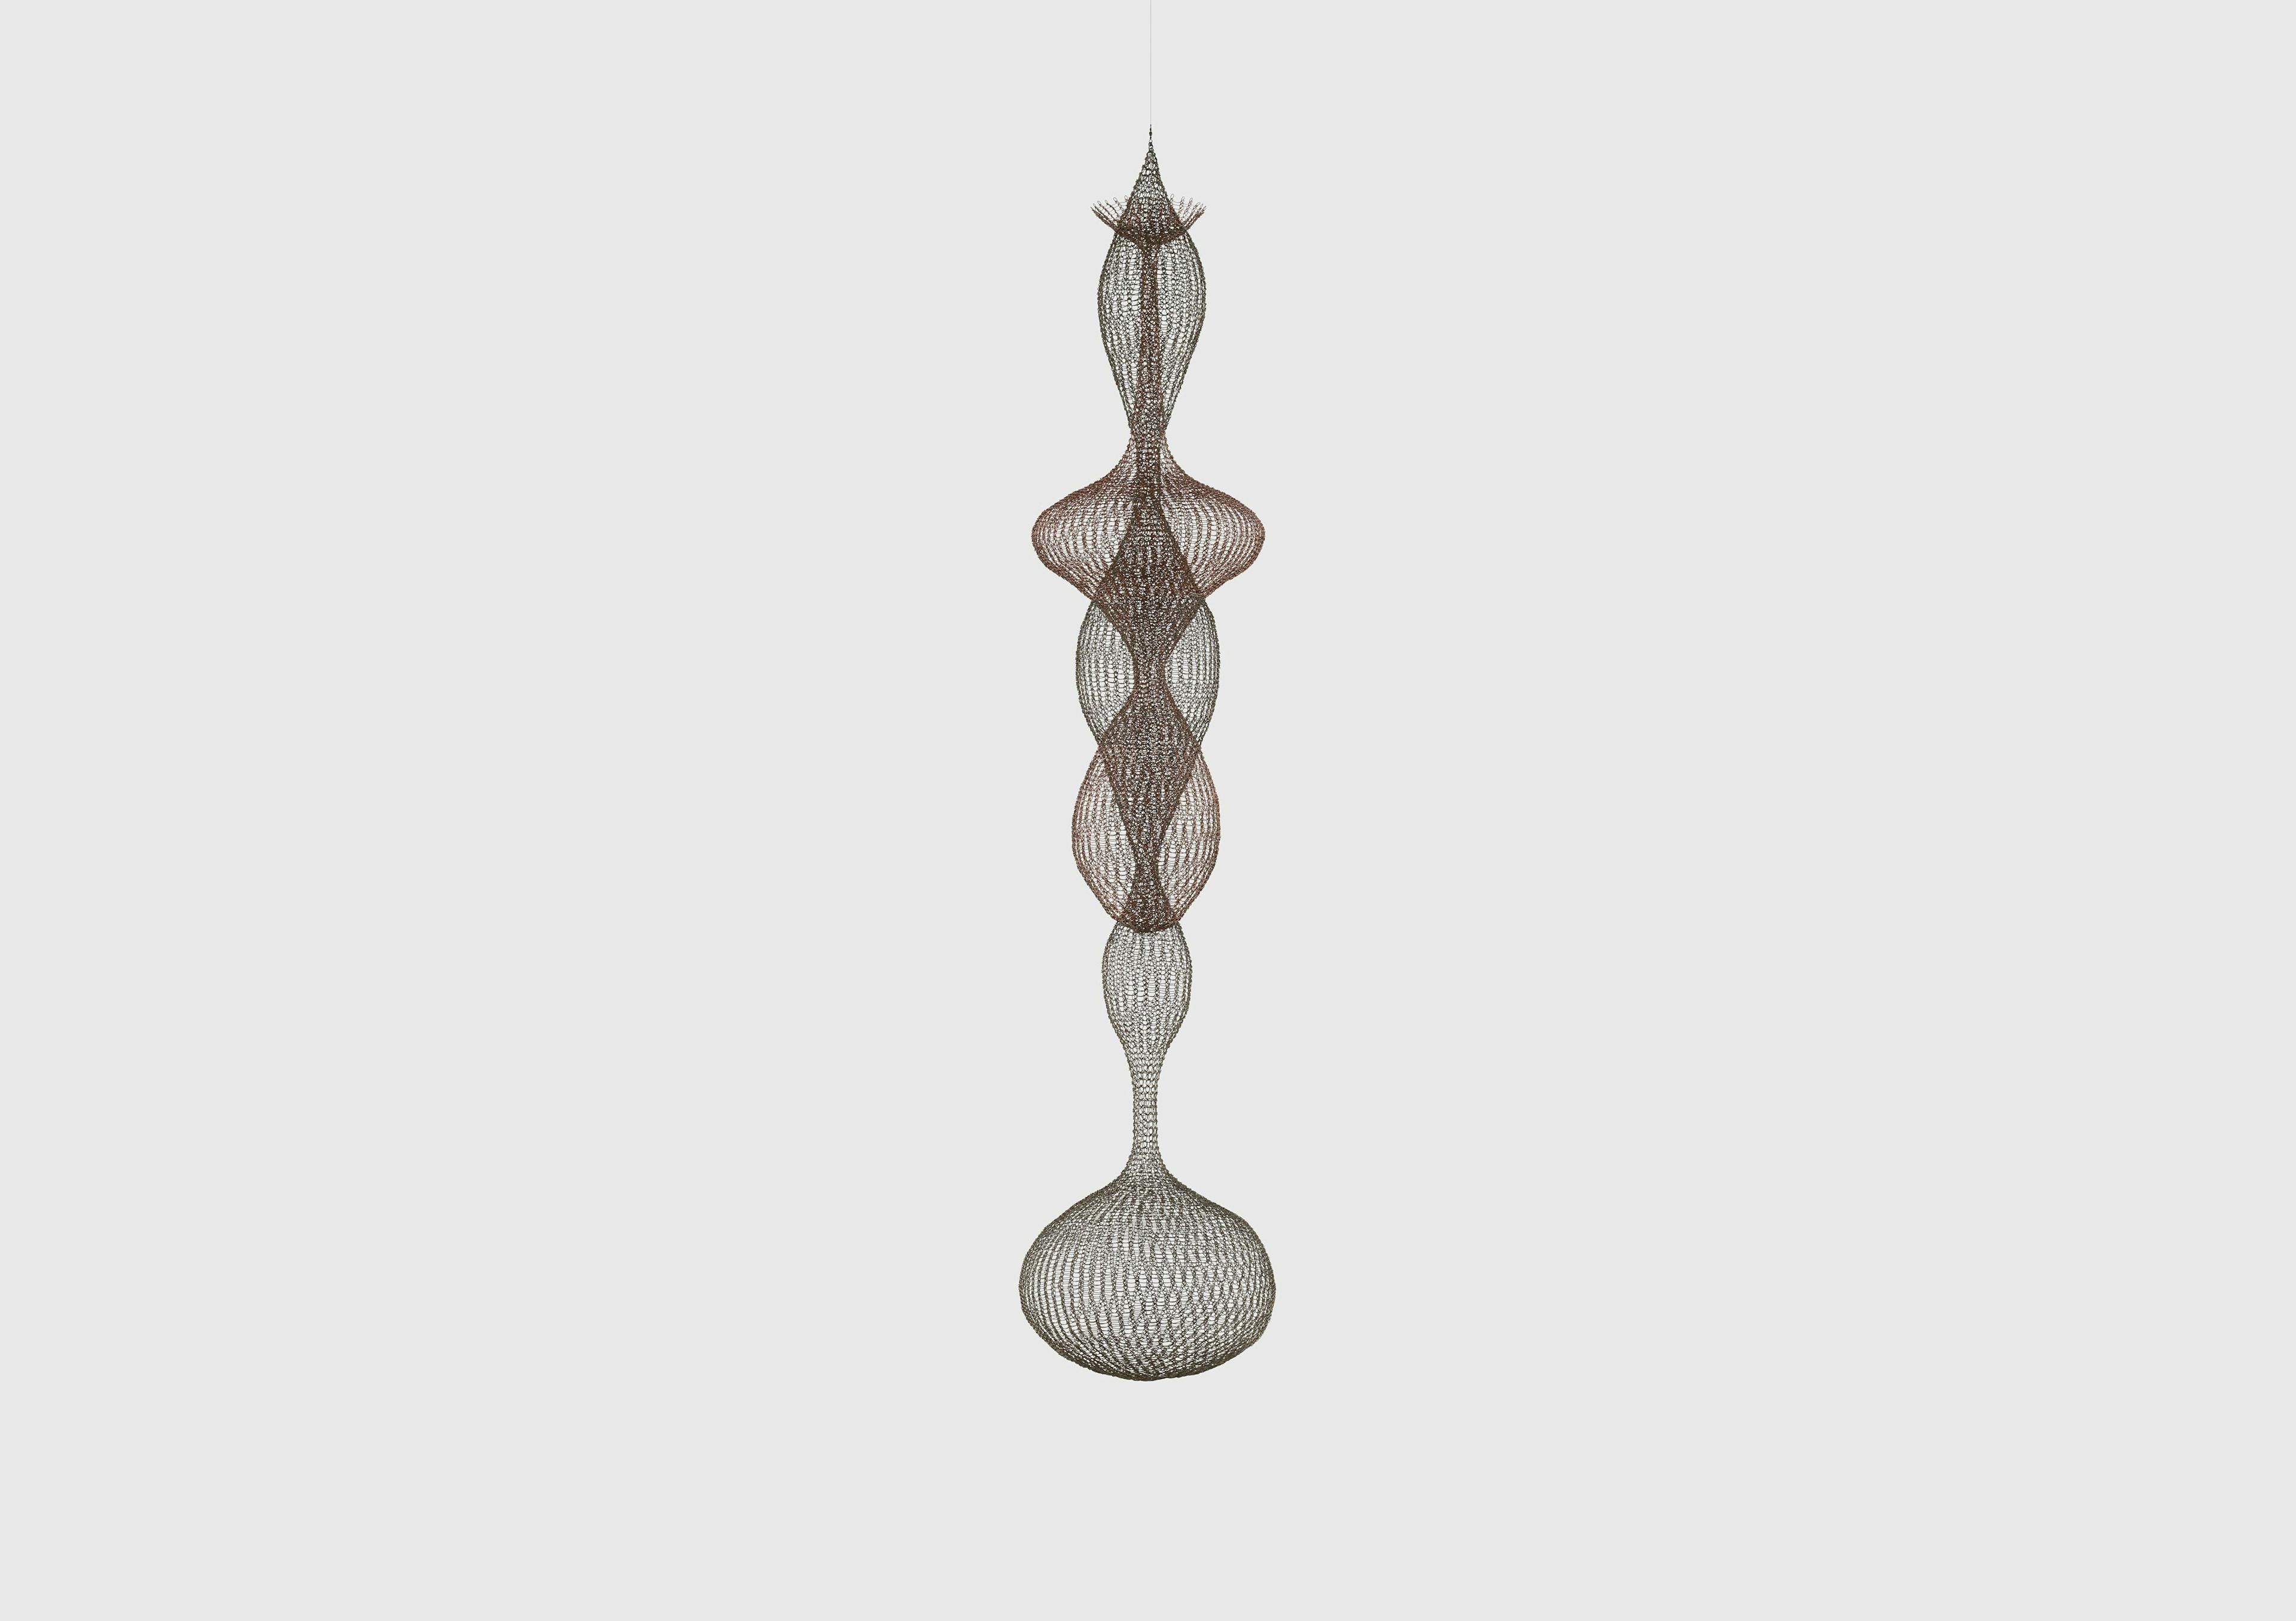 A mixed media artwork by Ruth Asawa, titled Untitled (S.237, Hanging Six-Lobed, Interlocking Continuous Form), circa 1958.